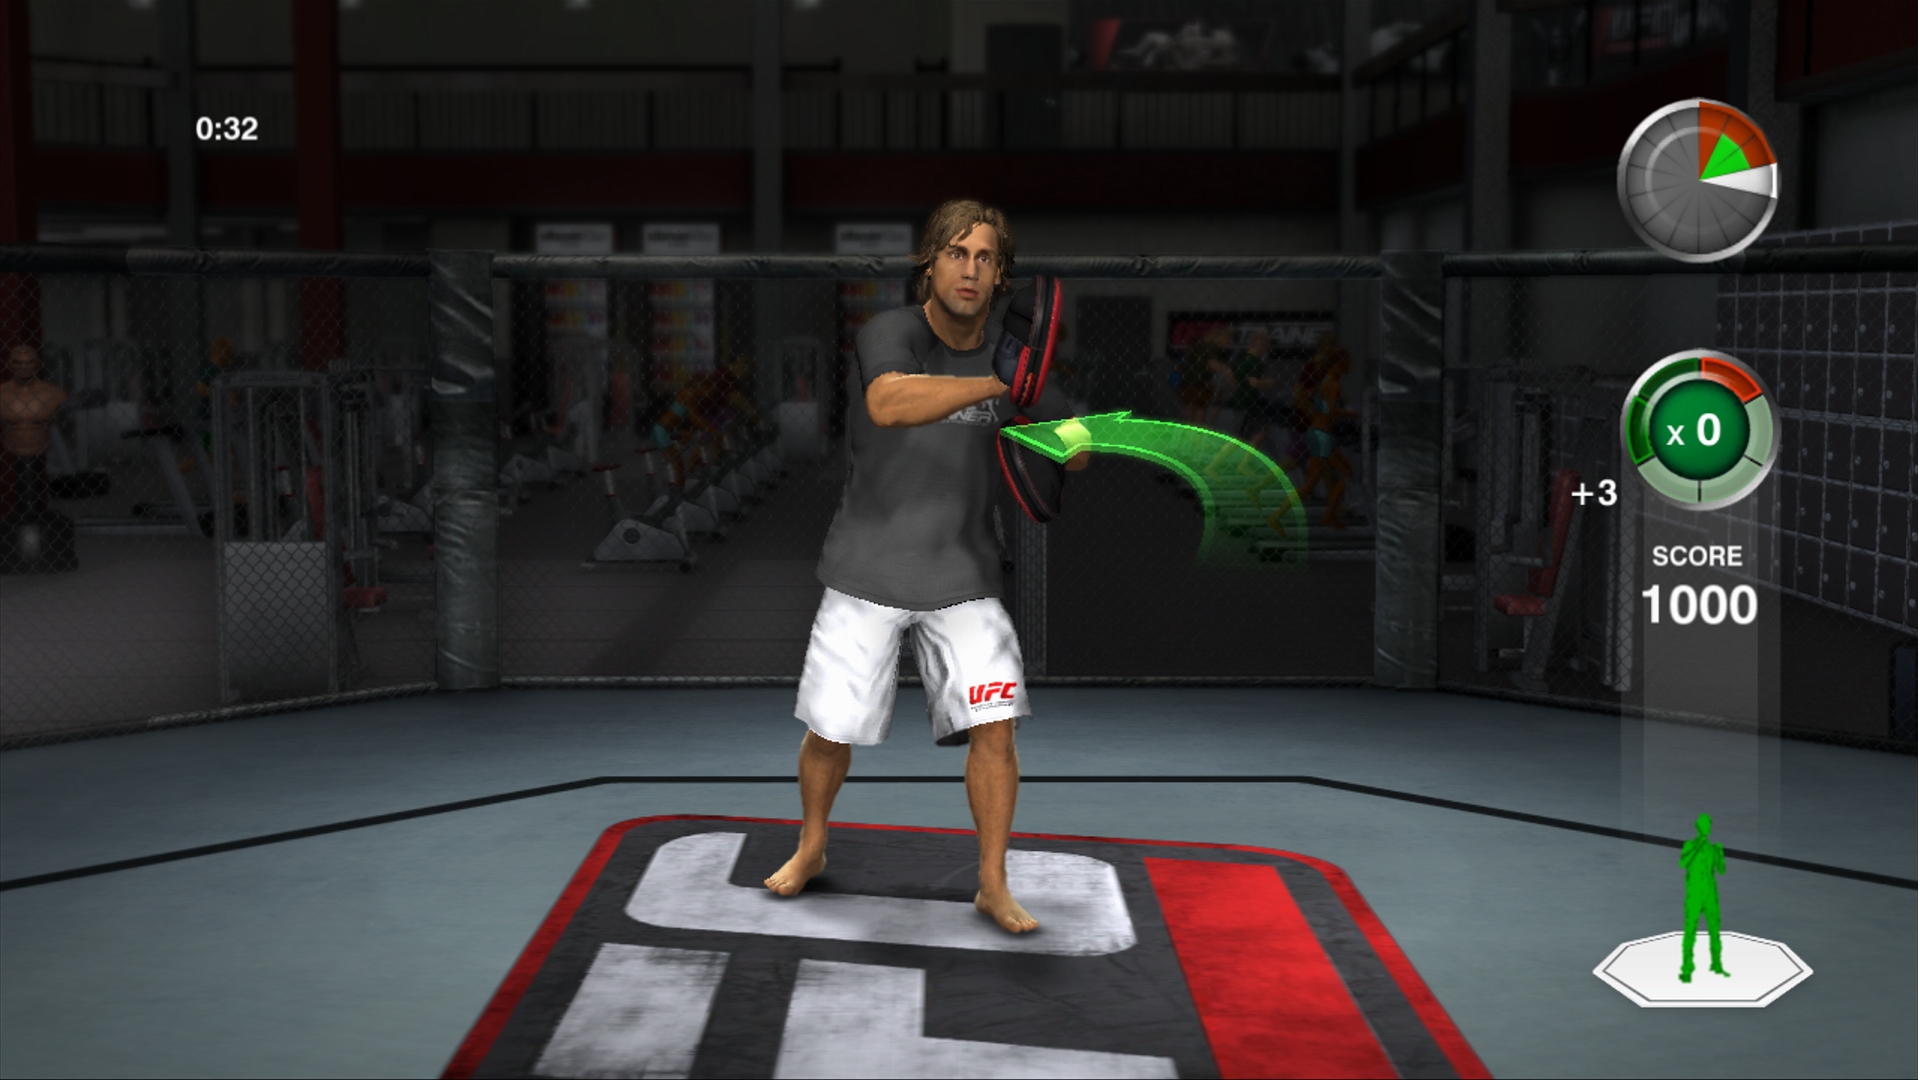 Игра про тренера. UFC personal Trainer. Xbox 360 Kinect UFC personal Trainer the Ultimate Fitness System. Personal Trainer личный тренер игра. UFC personal Trainer Xbox 360.